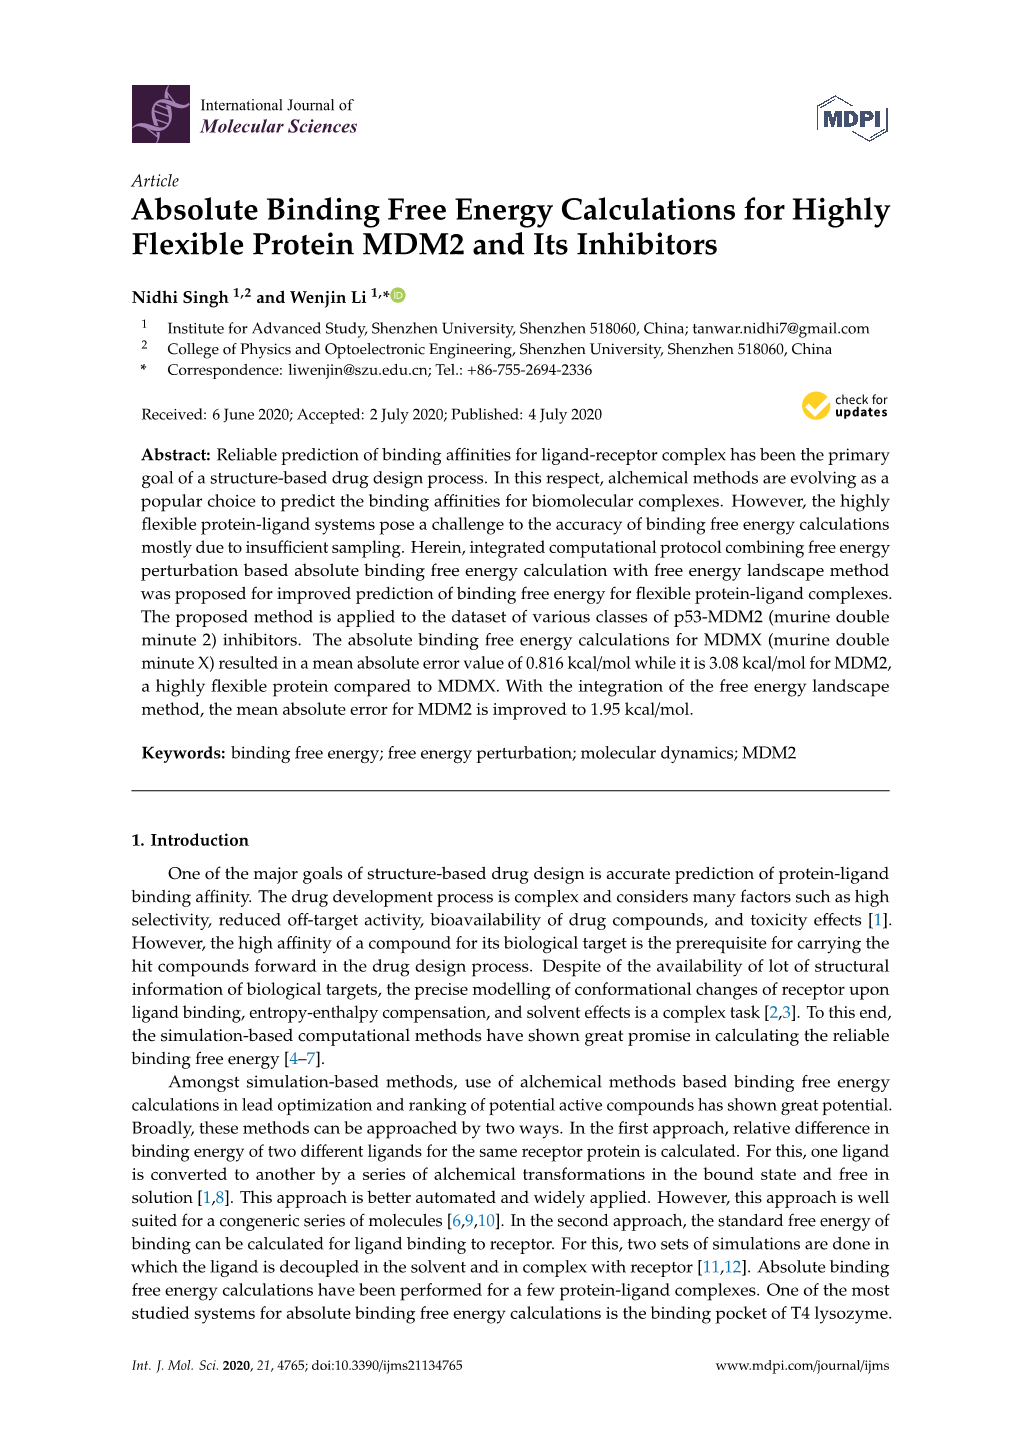 Absolute Binding Free Energy Calculations for Highly Flexible Protein MDM2 and Its Inhibitors